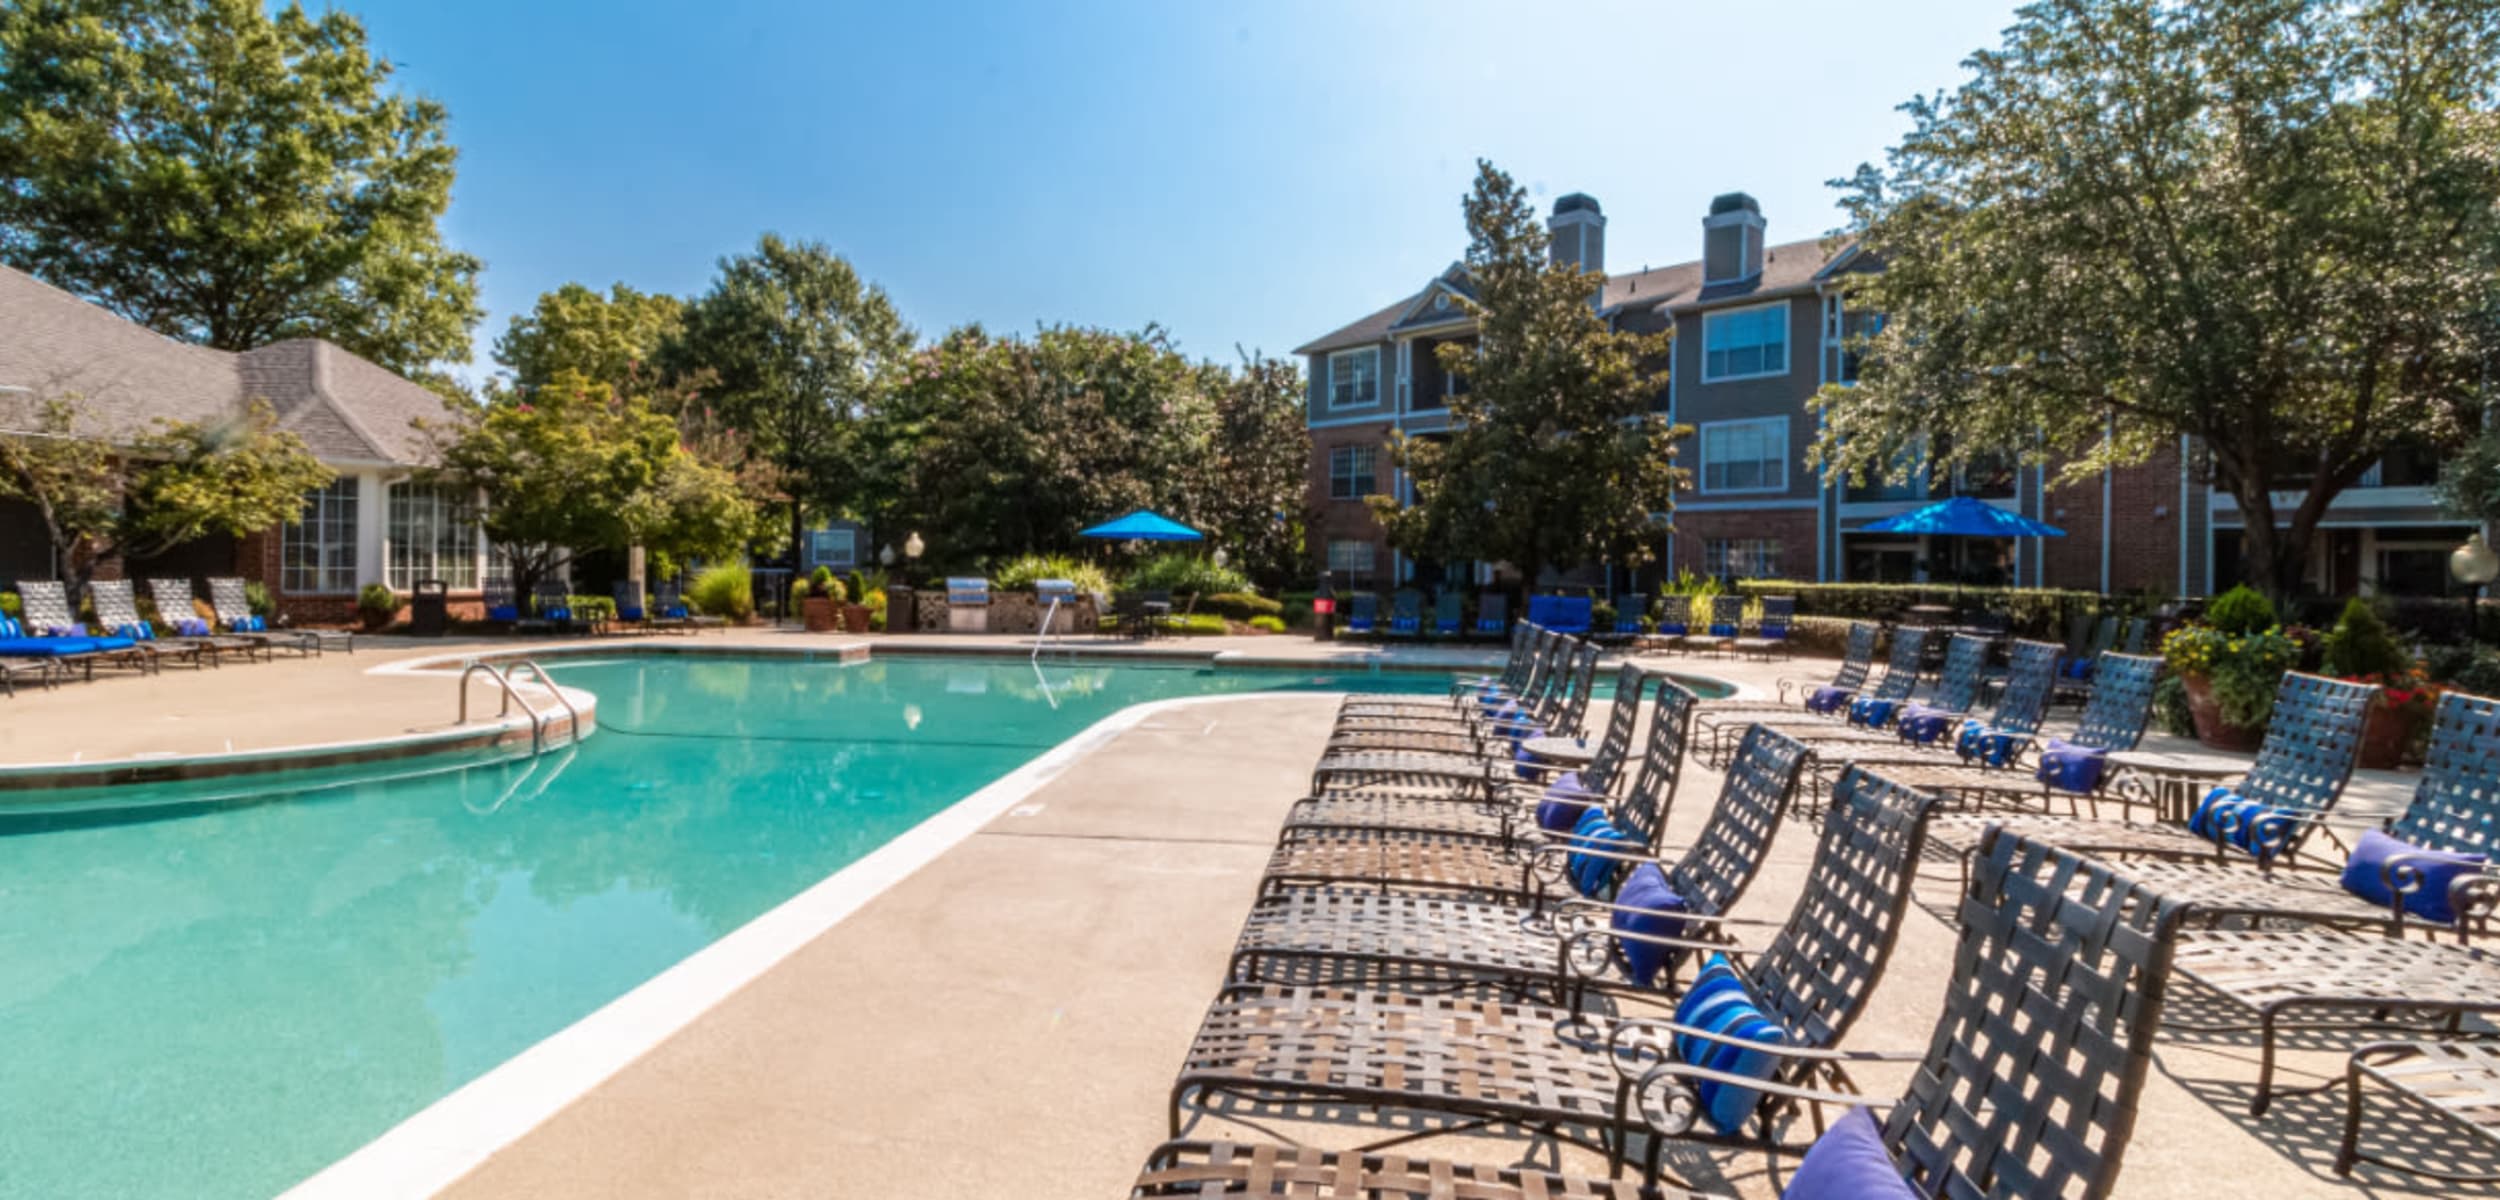 Lounge chairs lined up next to pool at Marquis of Carmel Valley in Charlotte, North Carolina